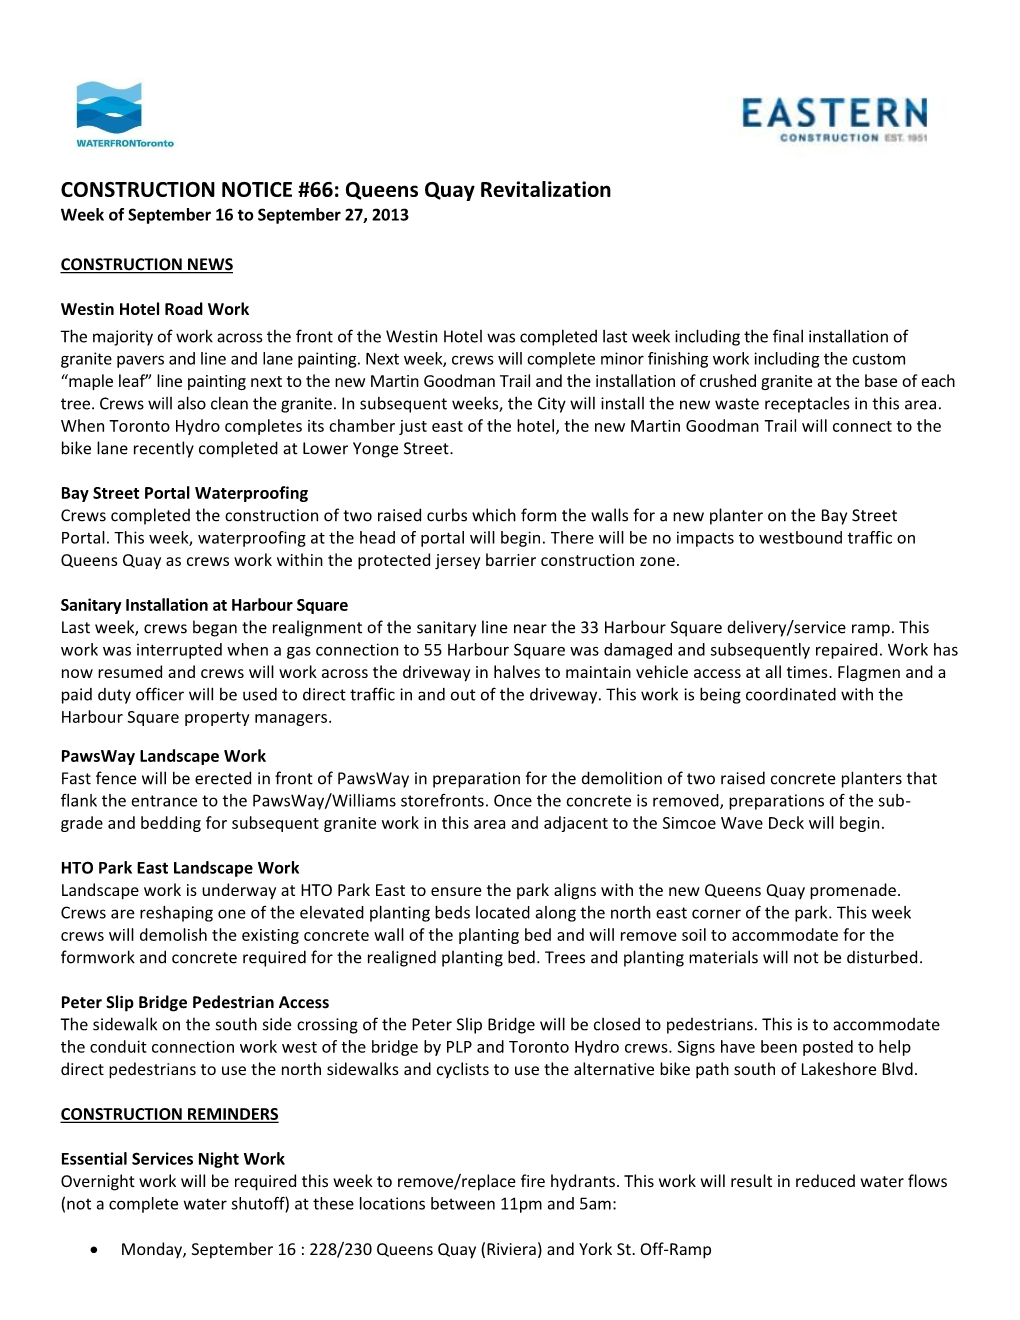 CONSTRUCTION NOTICE #66: Queens Quay Revitalization Week of September 16 to September 27, 2013